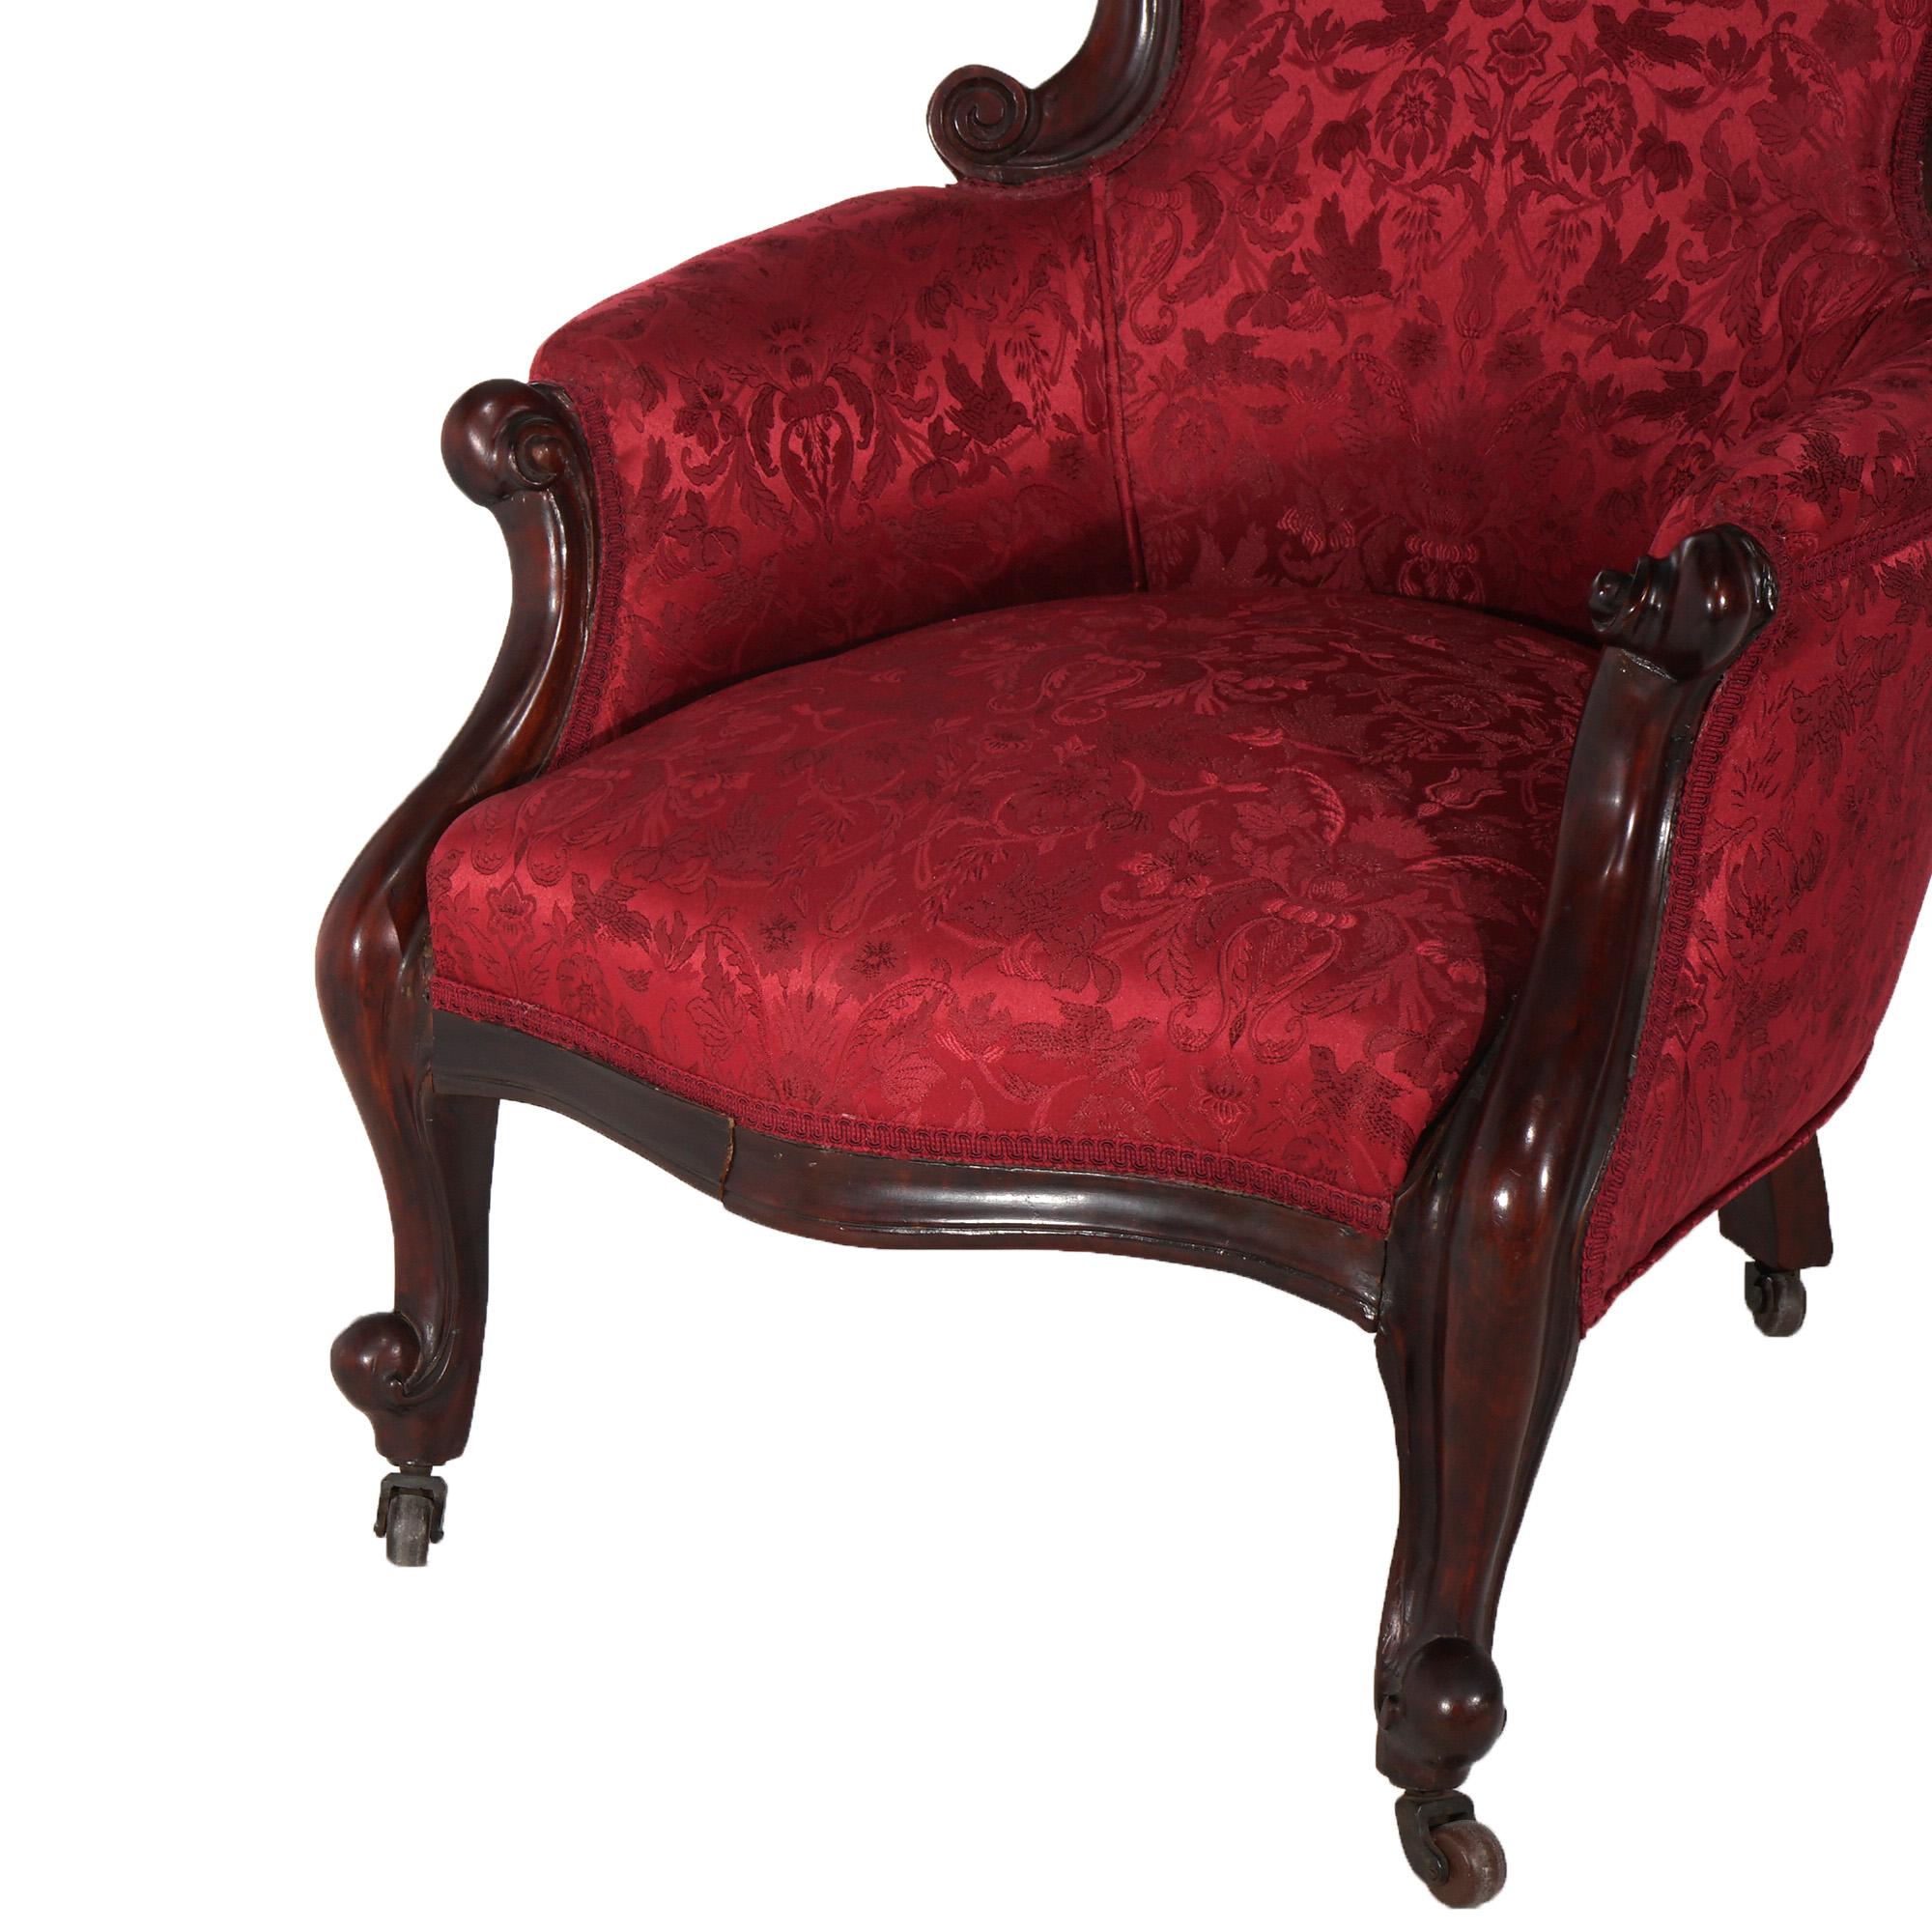 Antique French Victorian Louis XV Style Upholstered Parlor Chair C1890 In Good Condition For Sale In Big Flats, NY